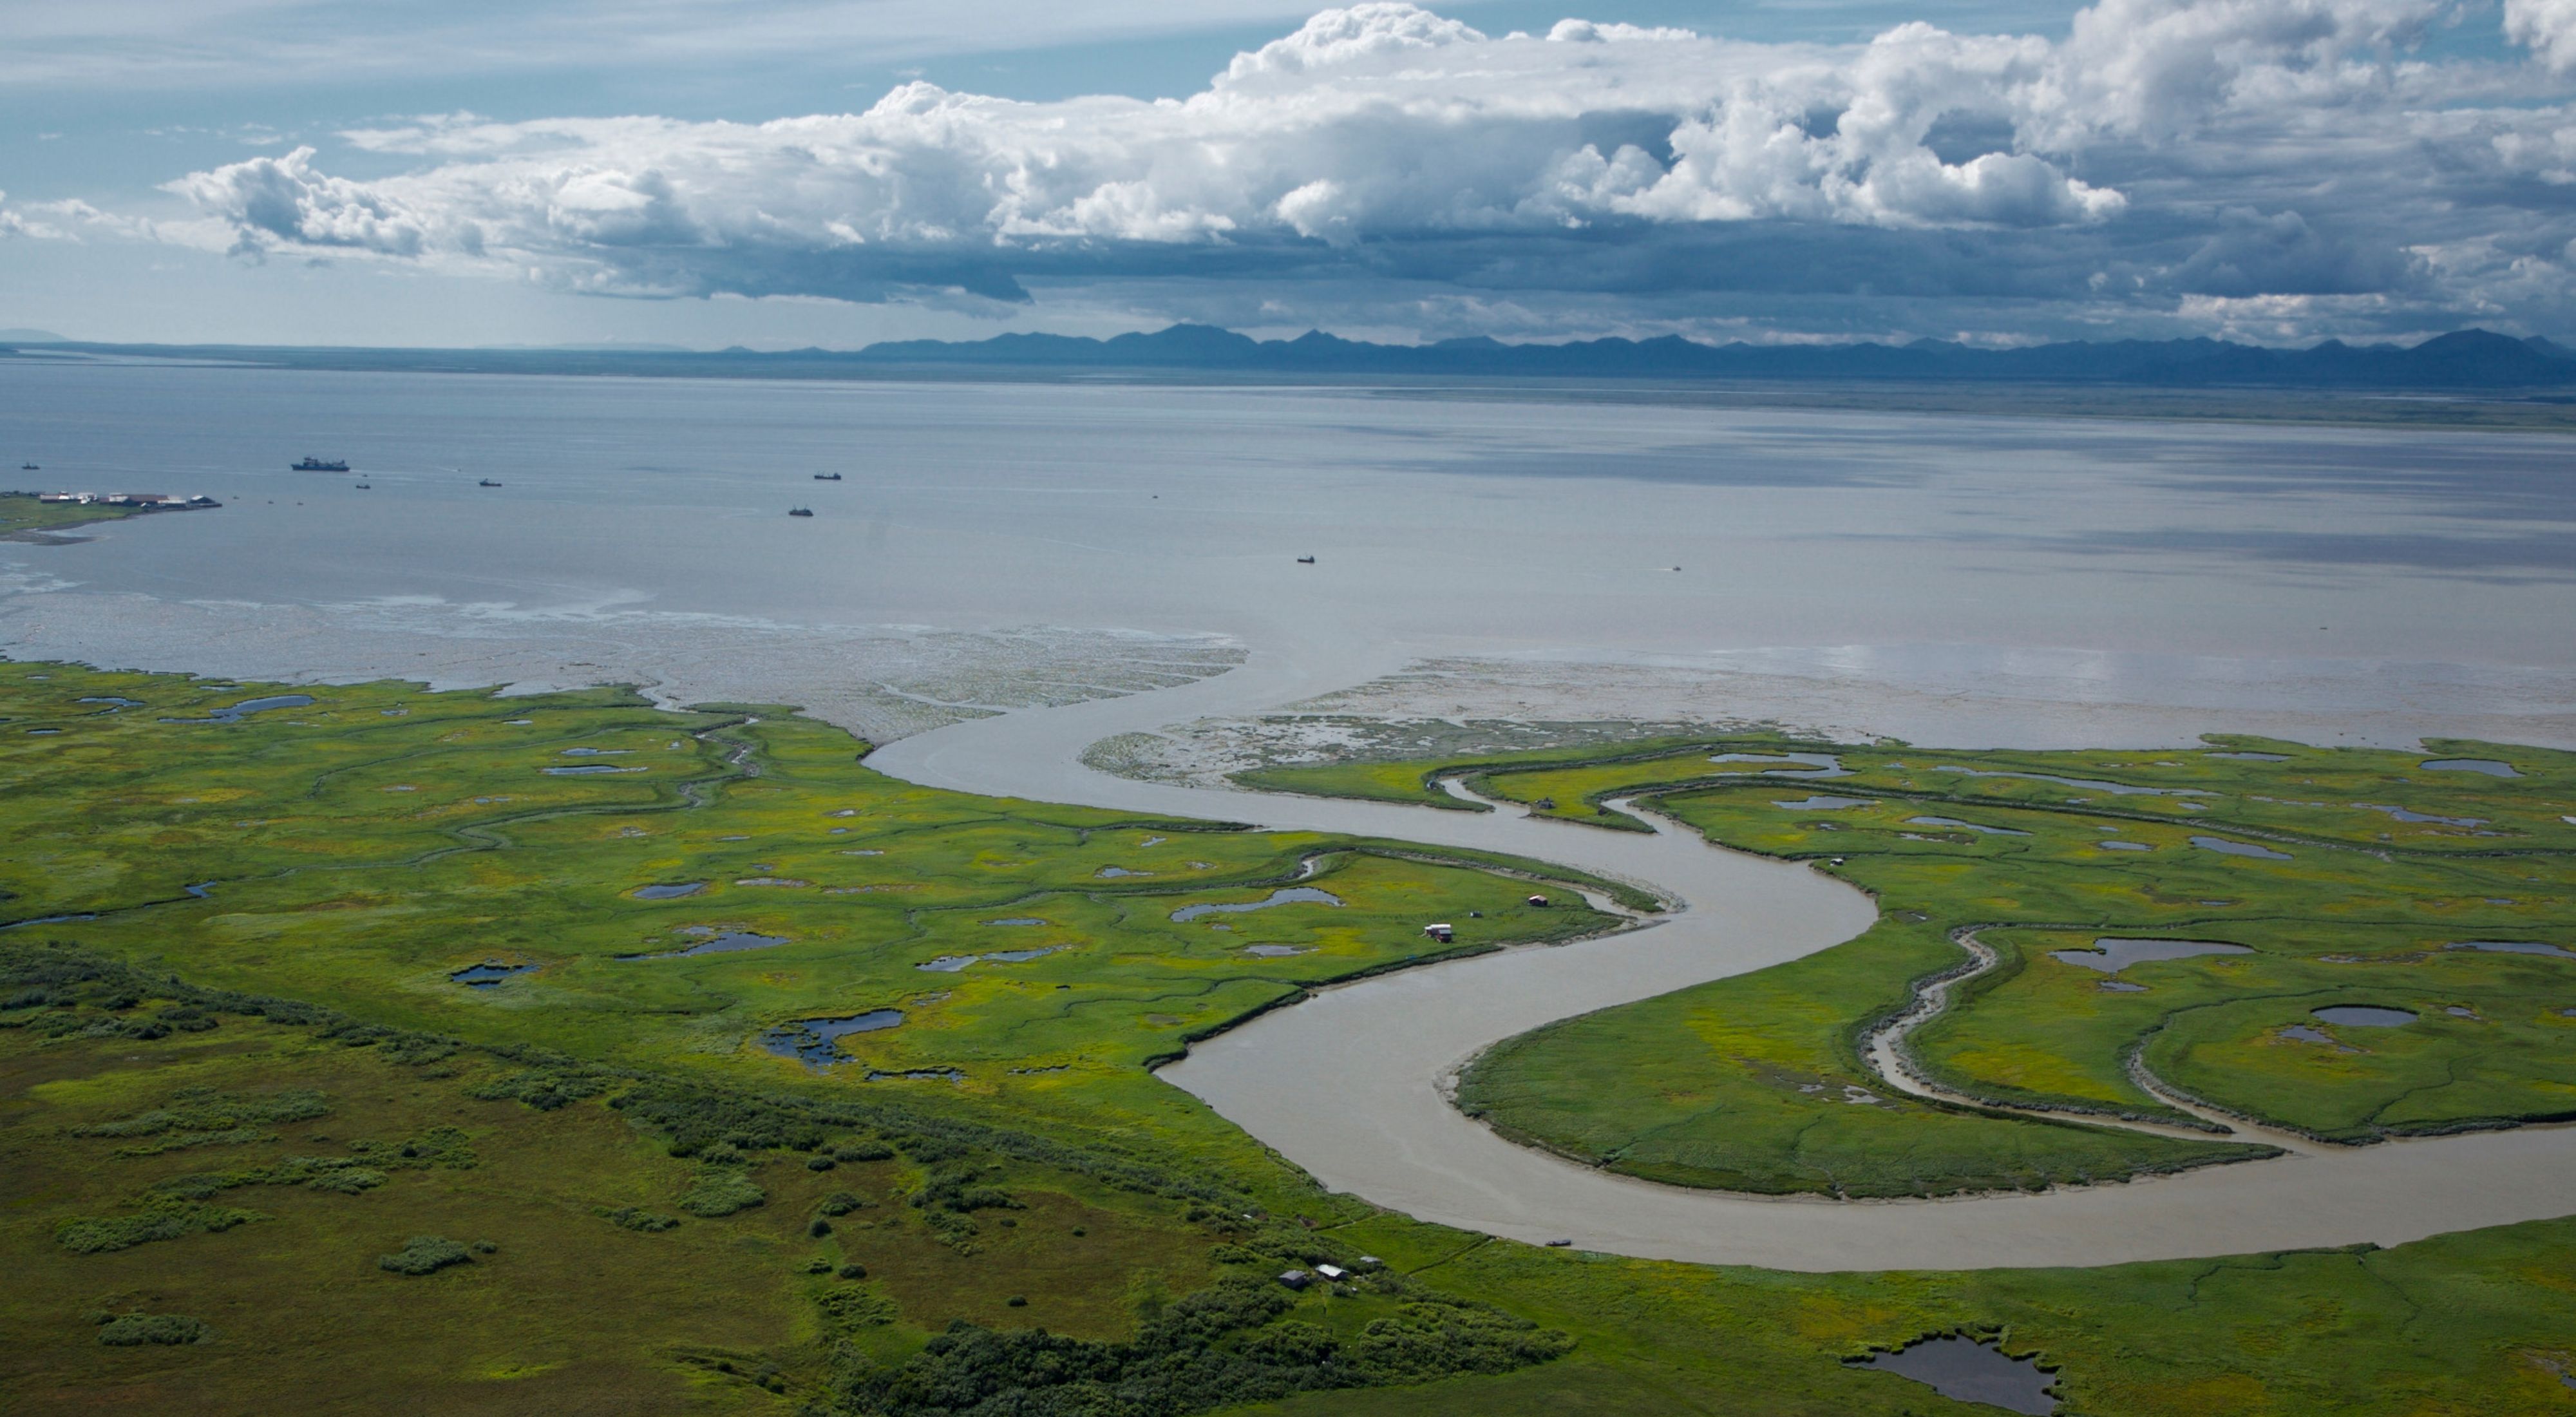 Aerial view of the Alaskan landscape of Bristol Bay and mountains.